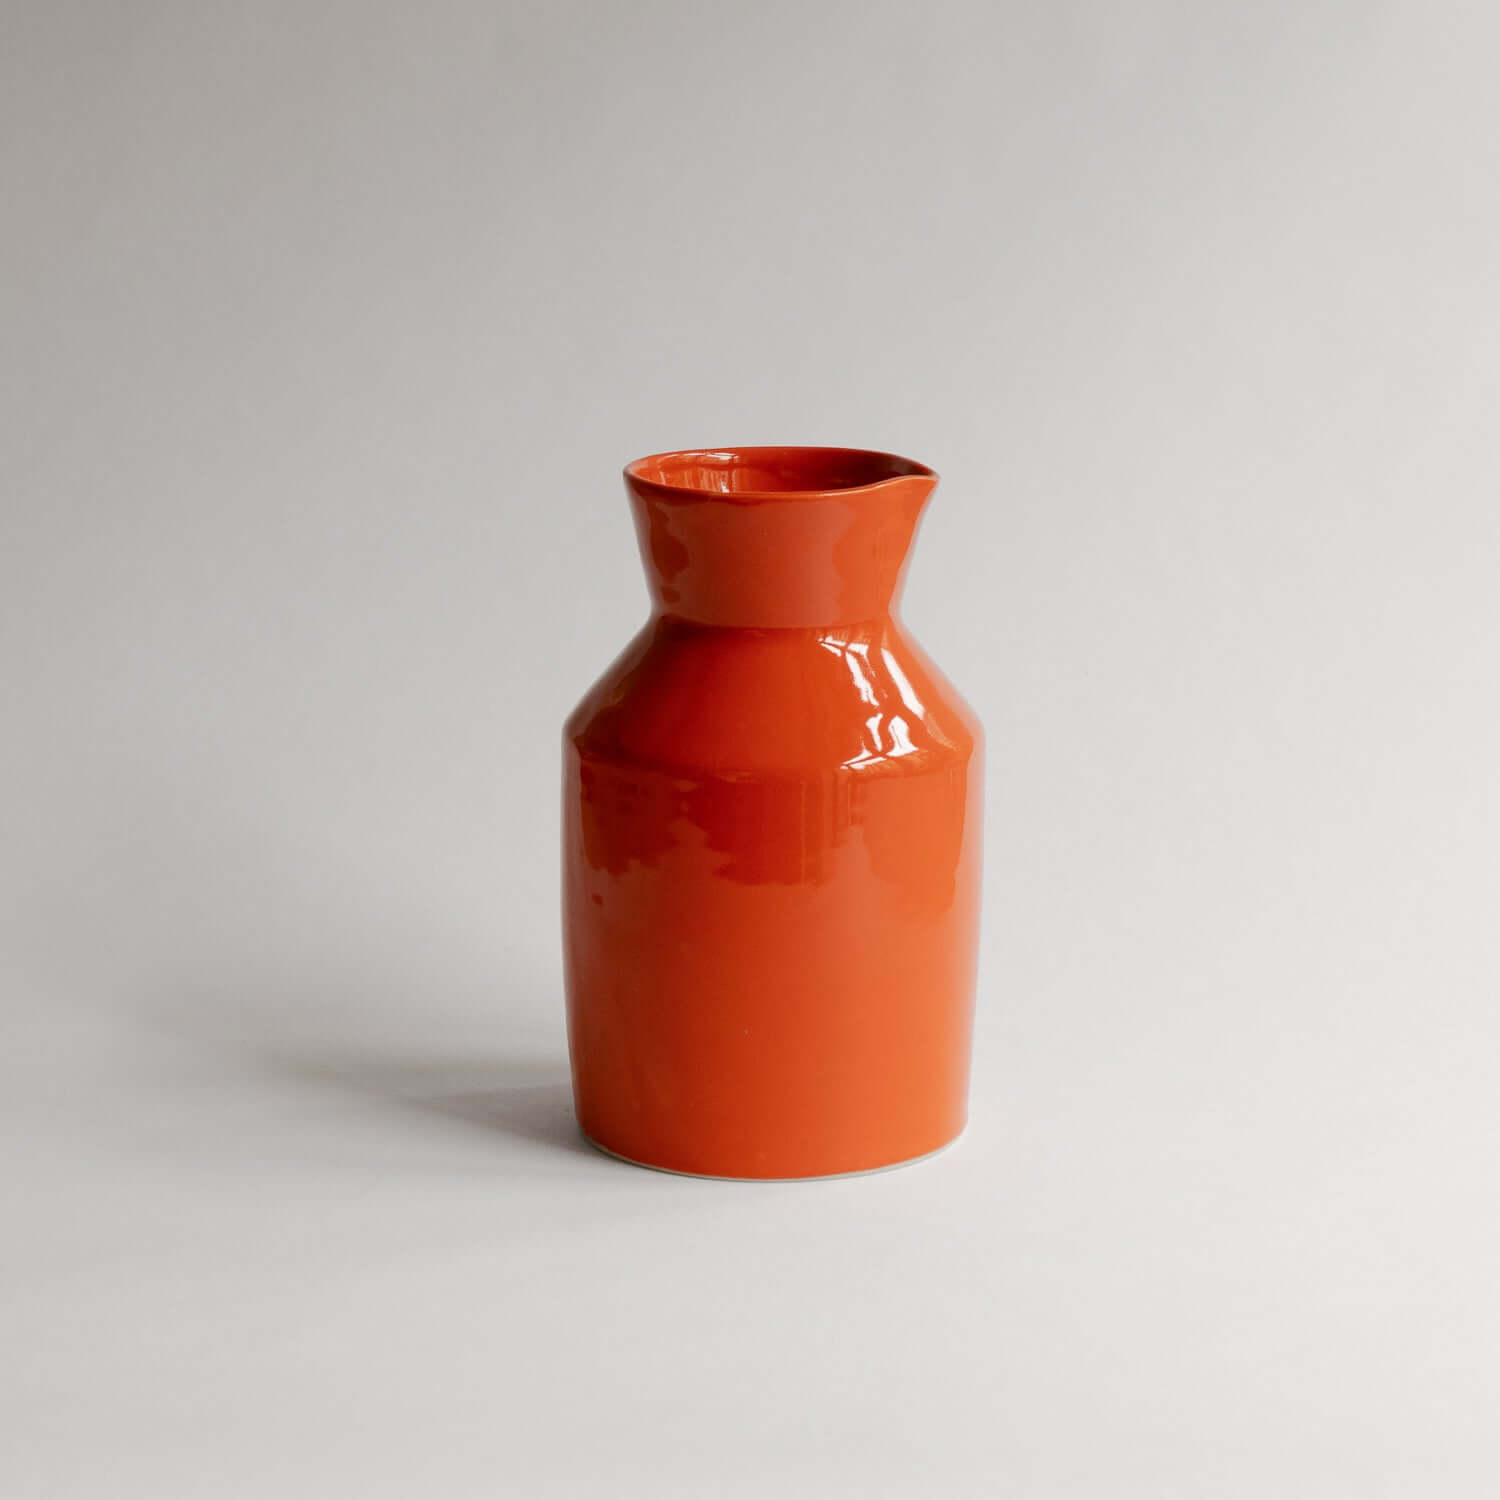 Elegant grey stoneware Pitcher Tuva & Flat White Cup set, fully glazed in red. Unique, food-safe, and lovingly handcrafted. Shop now! von viola beuscher ceramics